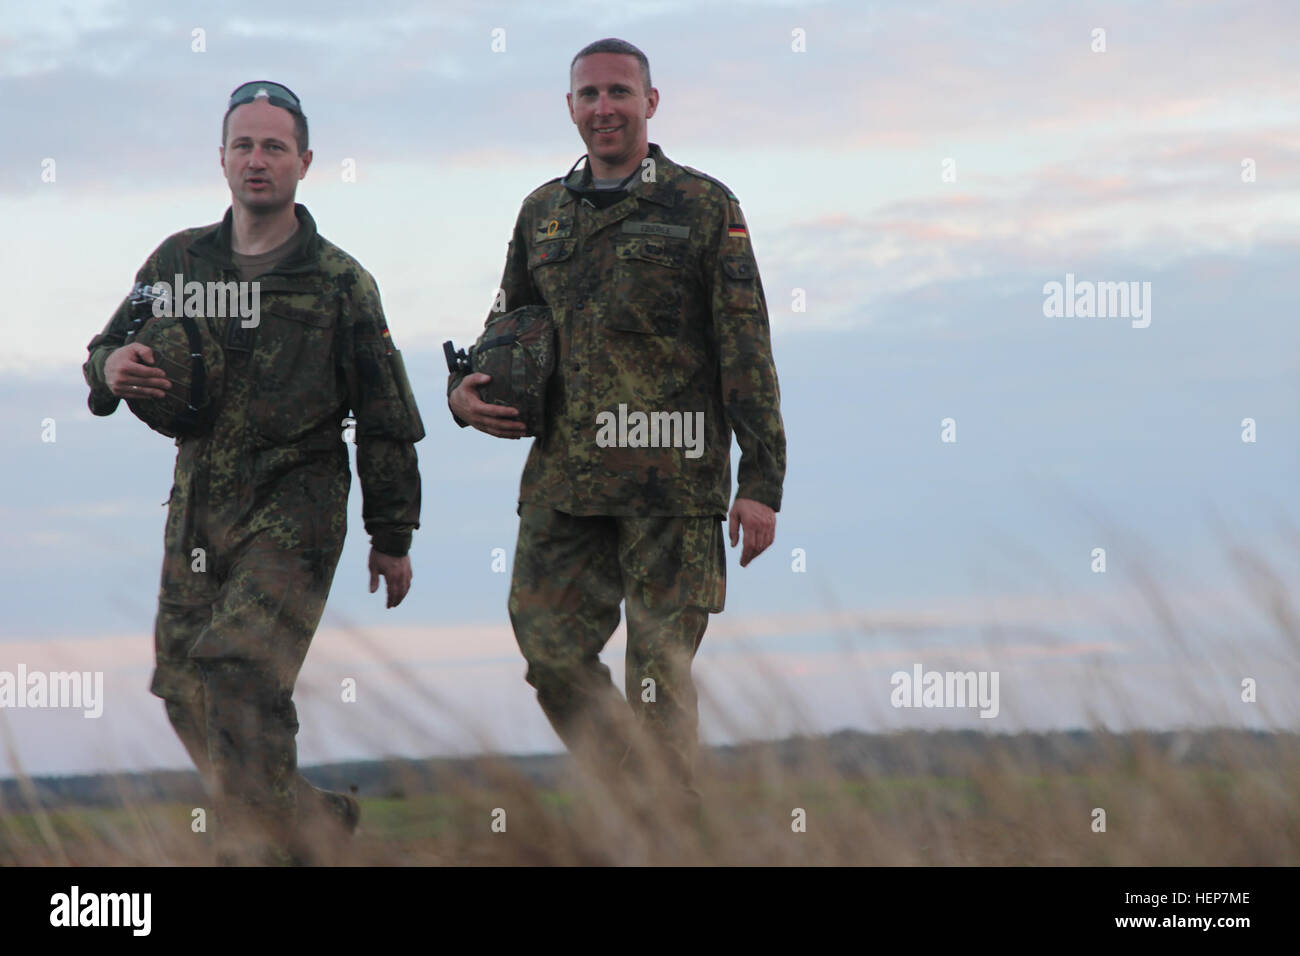 German paratroopers Master Sgt. Willi Derhsen and Sgt. Maj. Michael Eberle, of the Luftlandebrigade 26th, walk back from airborne operations at Plantation Airpark in Sylvania, Ga., March 20, 2015. Operation Skyfall is a joint, multilateral combat camera subject matter expert exchange, hosted by the 982nd Combat Camera Company, which takes place at multiple locations in Georgia. Operation Skyfall is an event which focuses on interoperability of combat camera training and capturing airborne operations with three partner nations and multi-service units. (U.S. Army photo by Spc. Kelson Brooks/ Rel Stock Photo